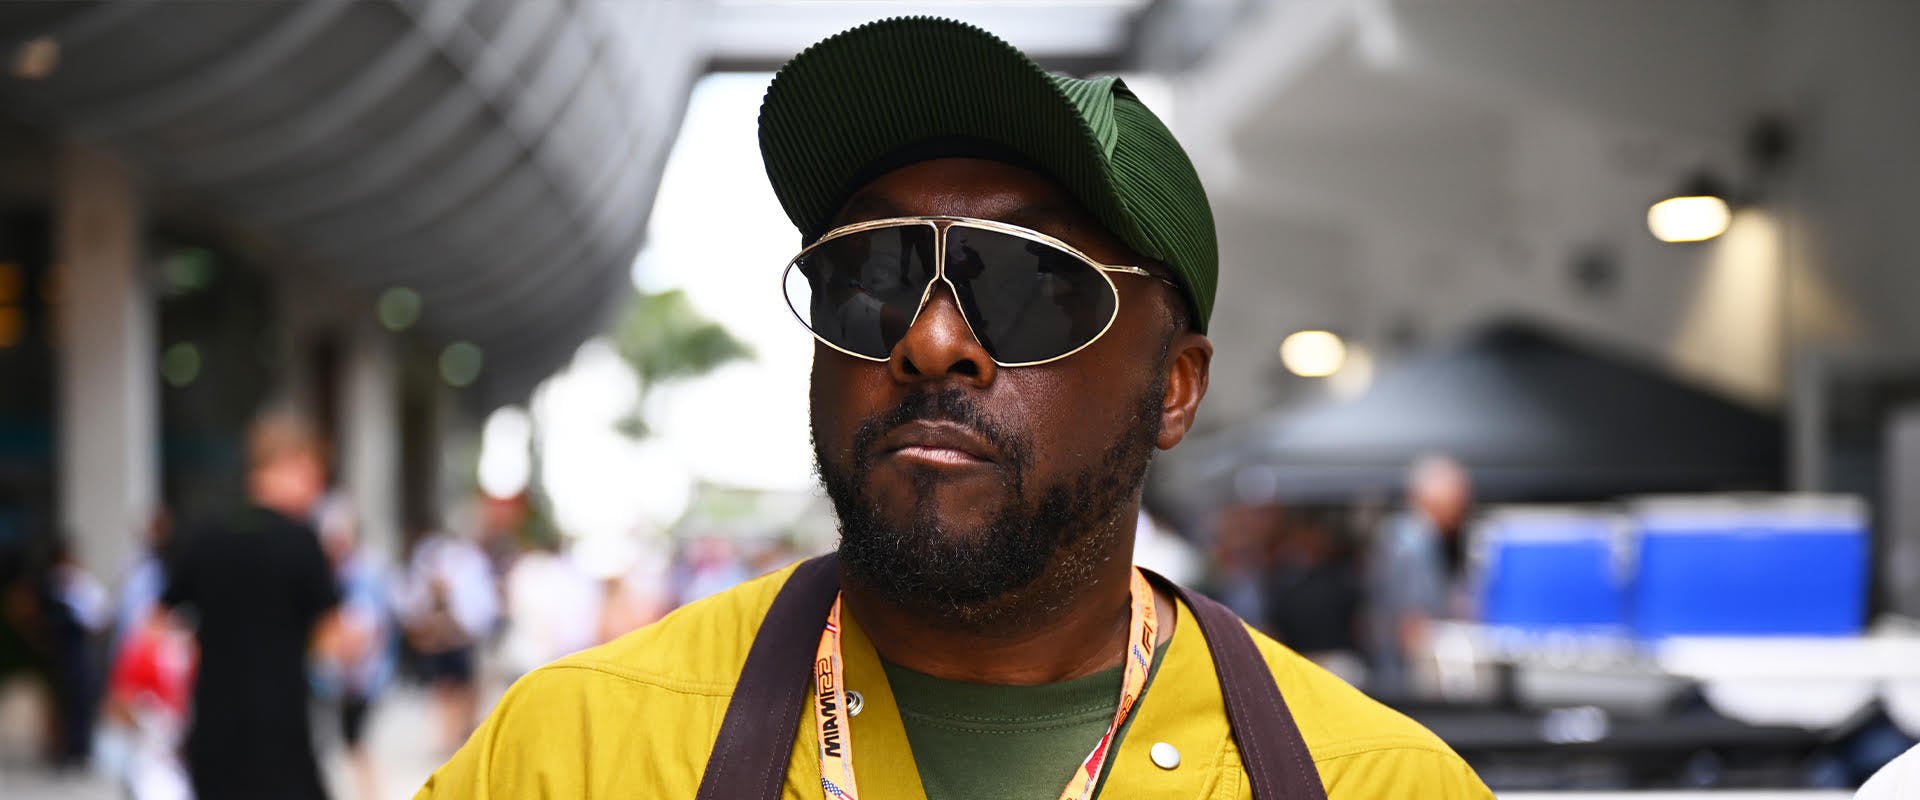 MIAMI, FLORIDA - MAY 08: Will.I.Am walks in the Paddock prior to the F1 Grand Prix of Miami at the Miami International Autodrome on May 08, 2022 in Miami, Florida